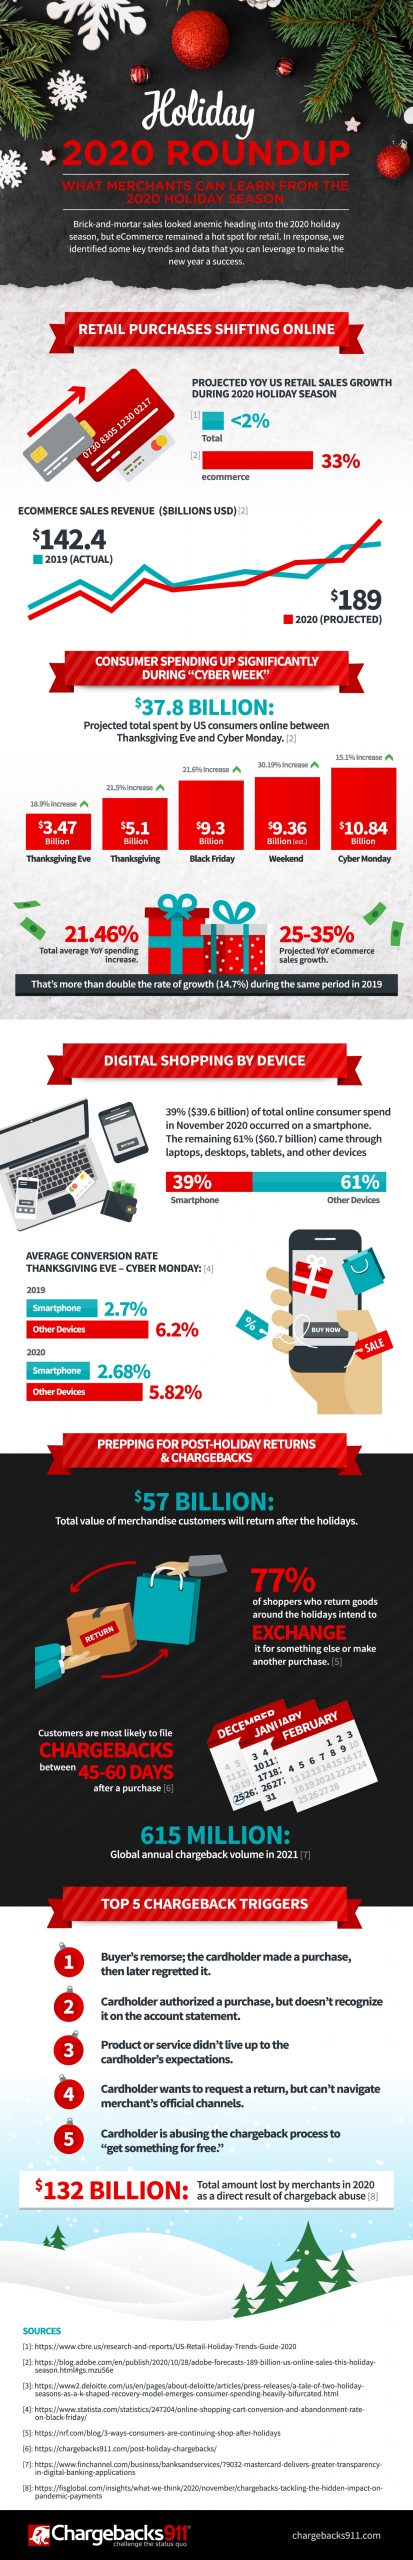 Remote Sales Channels are Growing Rapidly, but so Are Threat Sources [Infographic]